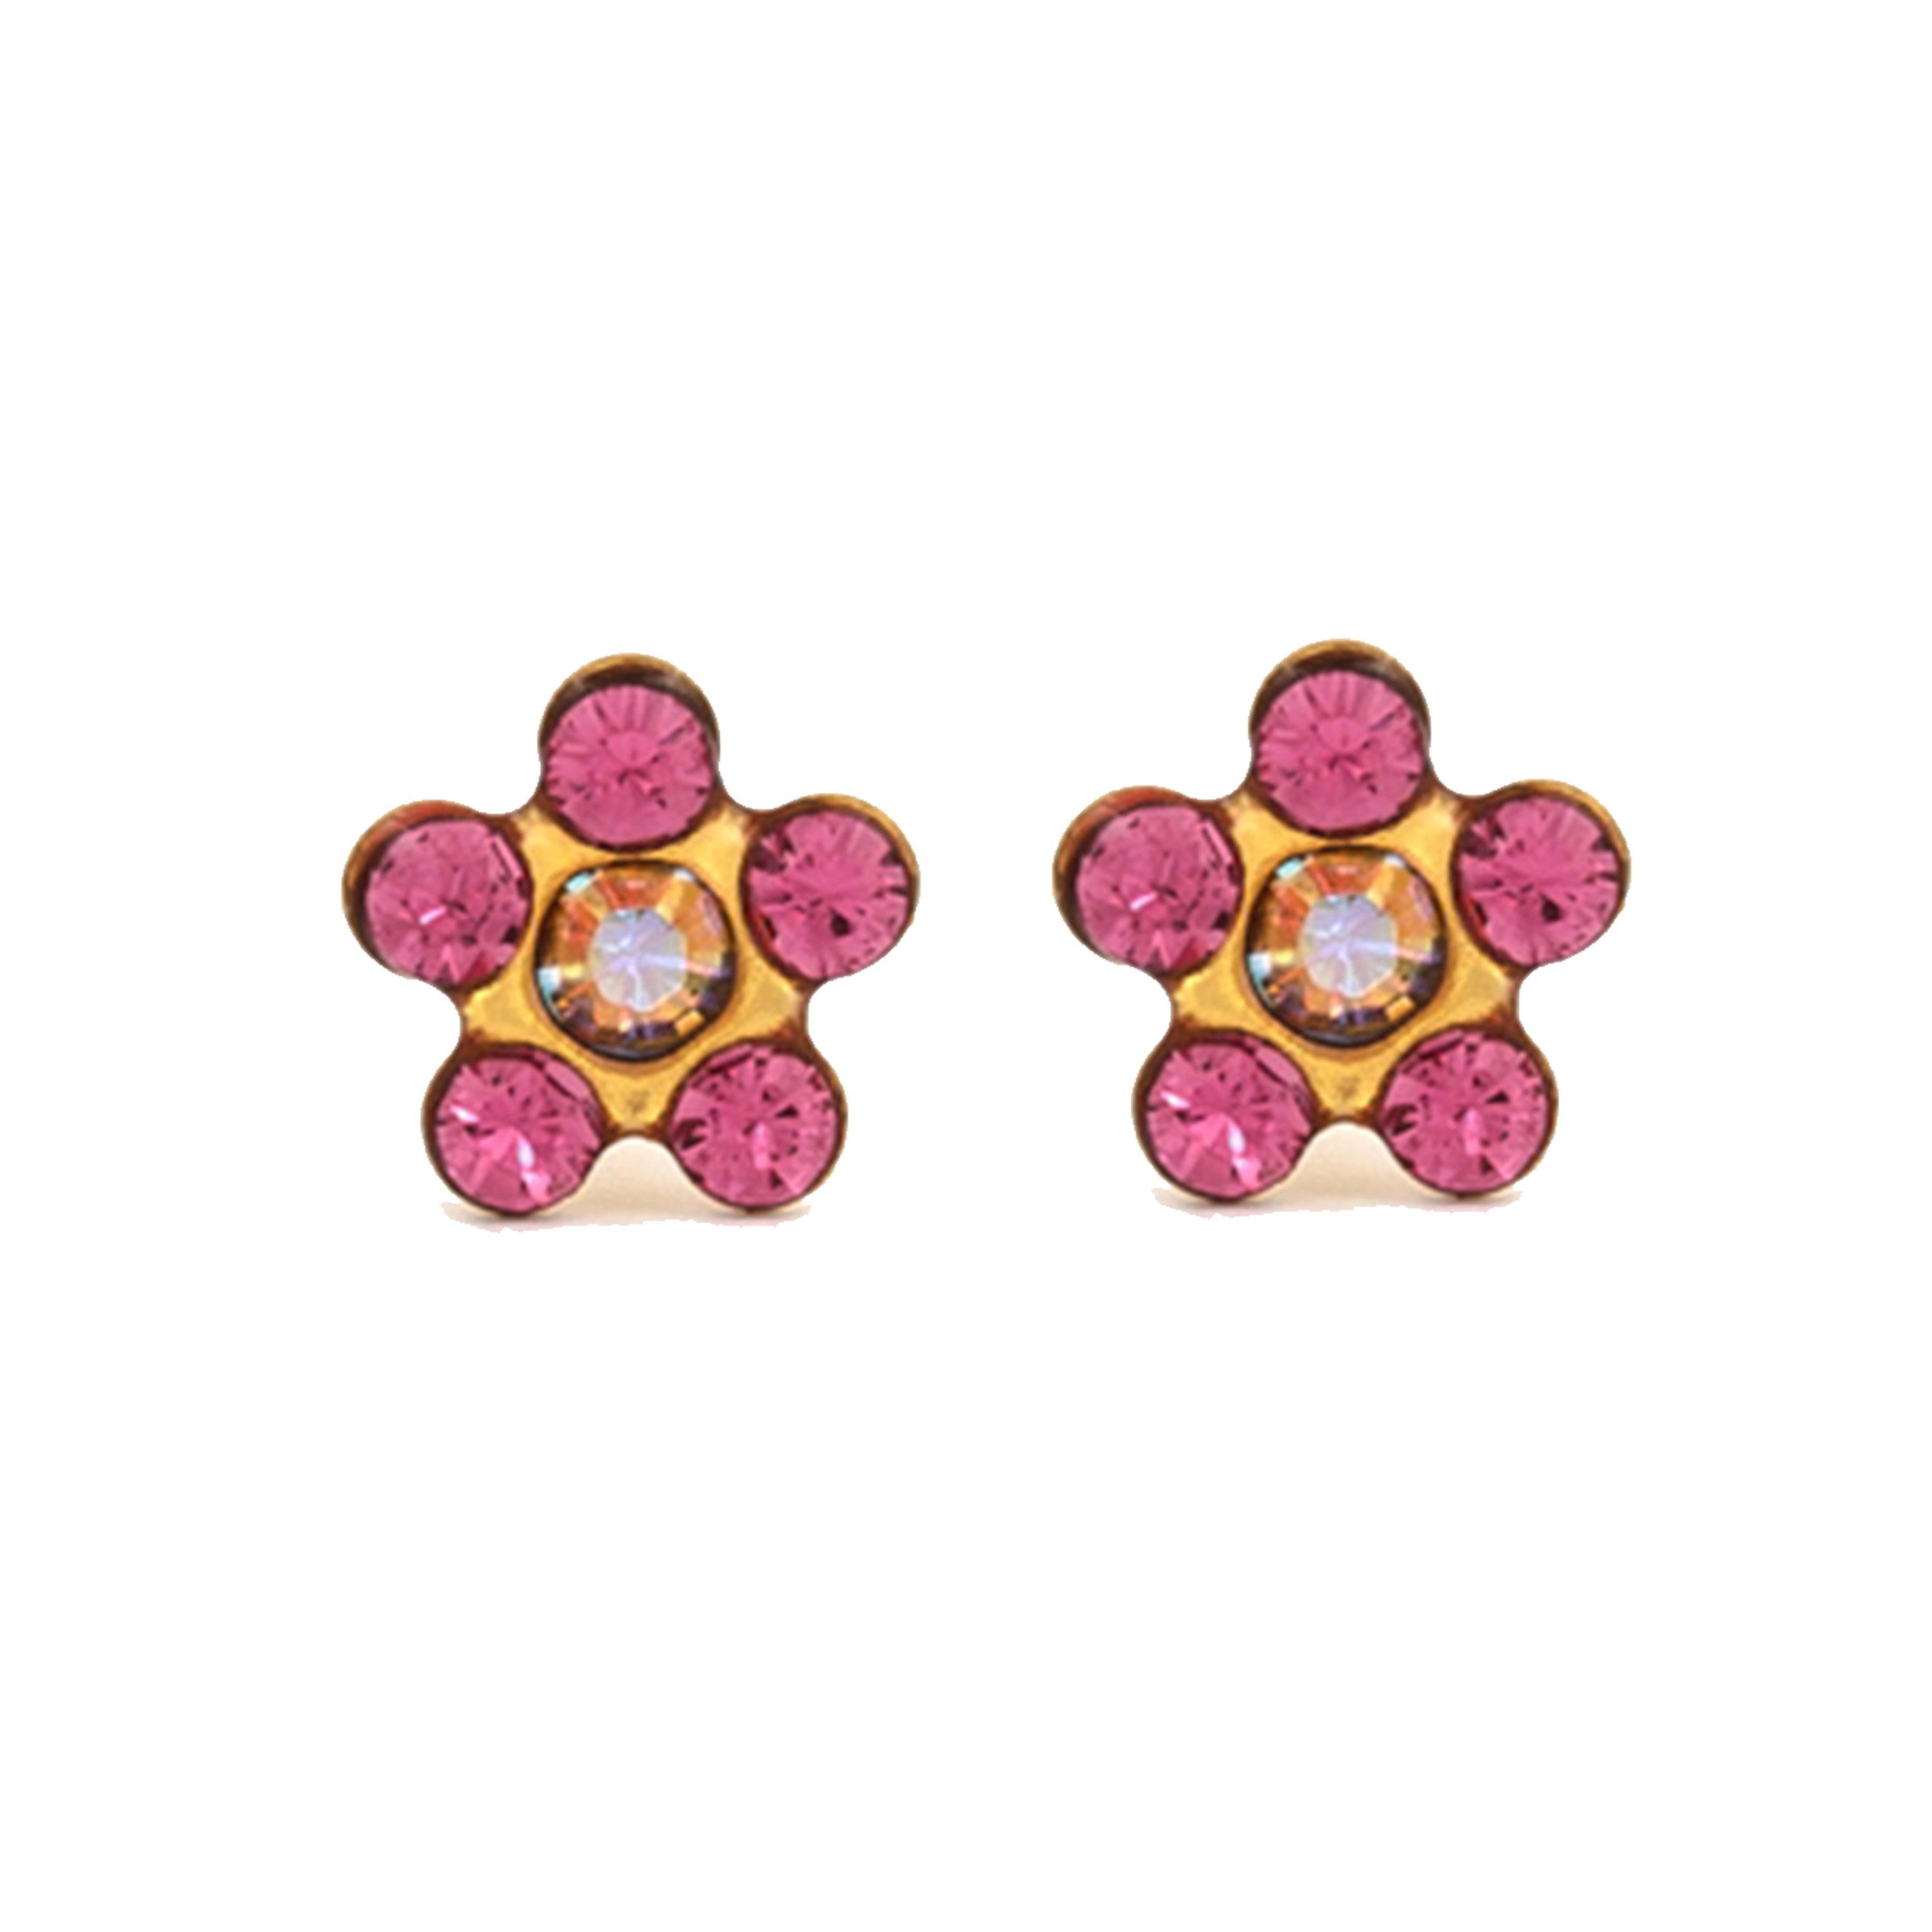 Daisy (Flower) - AB Crystal - Oct Rose – Light Blue & Pink | 24K Pure Gold-Plated Piercing Earrings with Ear Piercing Cartridge | Studex System75